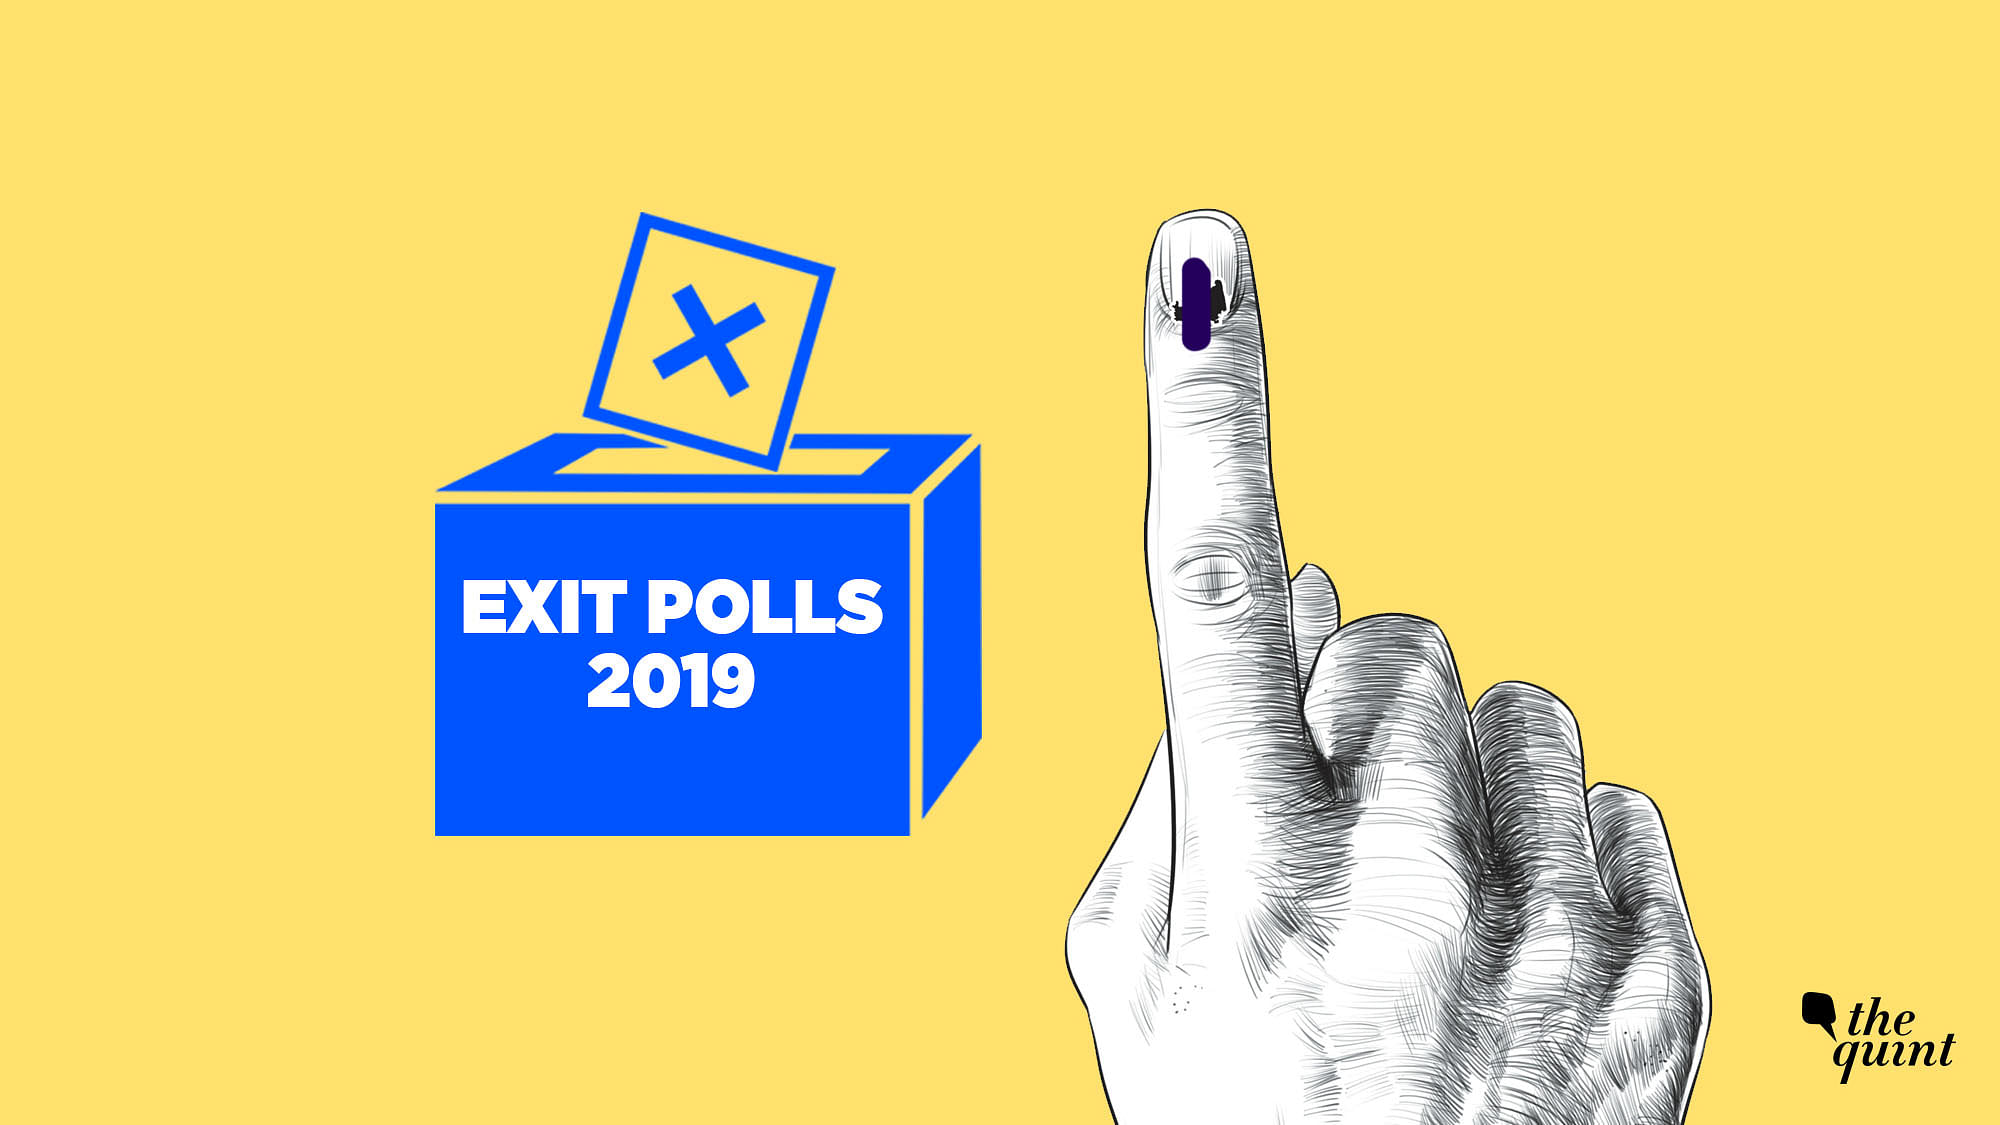 What, according to the exit polls, are the big predictions?